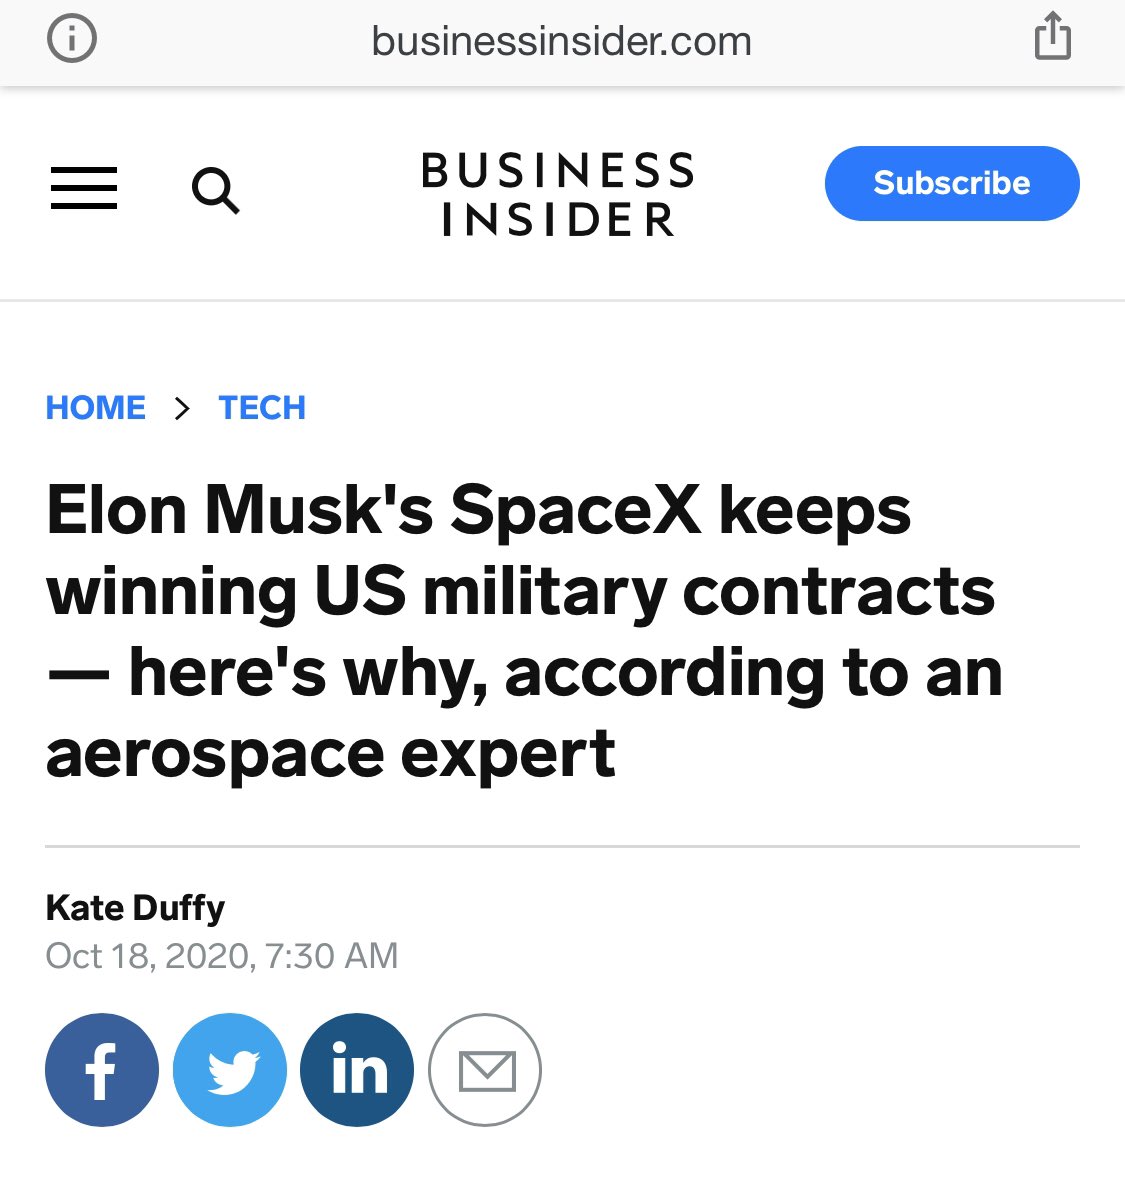 to effectively combat climate change, the US needs to radically shrink the size of its military, the largest polluter of the world. but why make the military smaller when many companies can make billions in the military-industrial-complex? space x among them